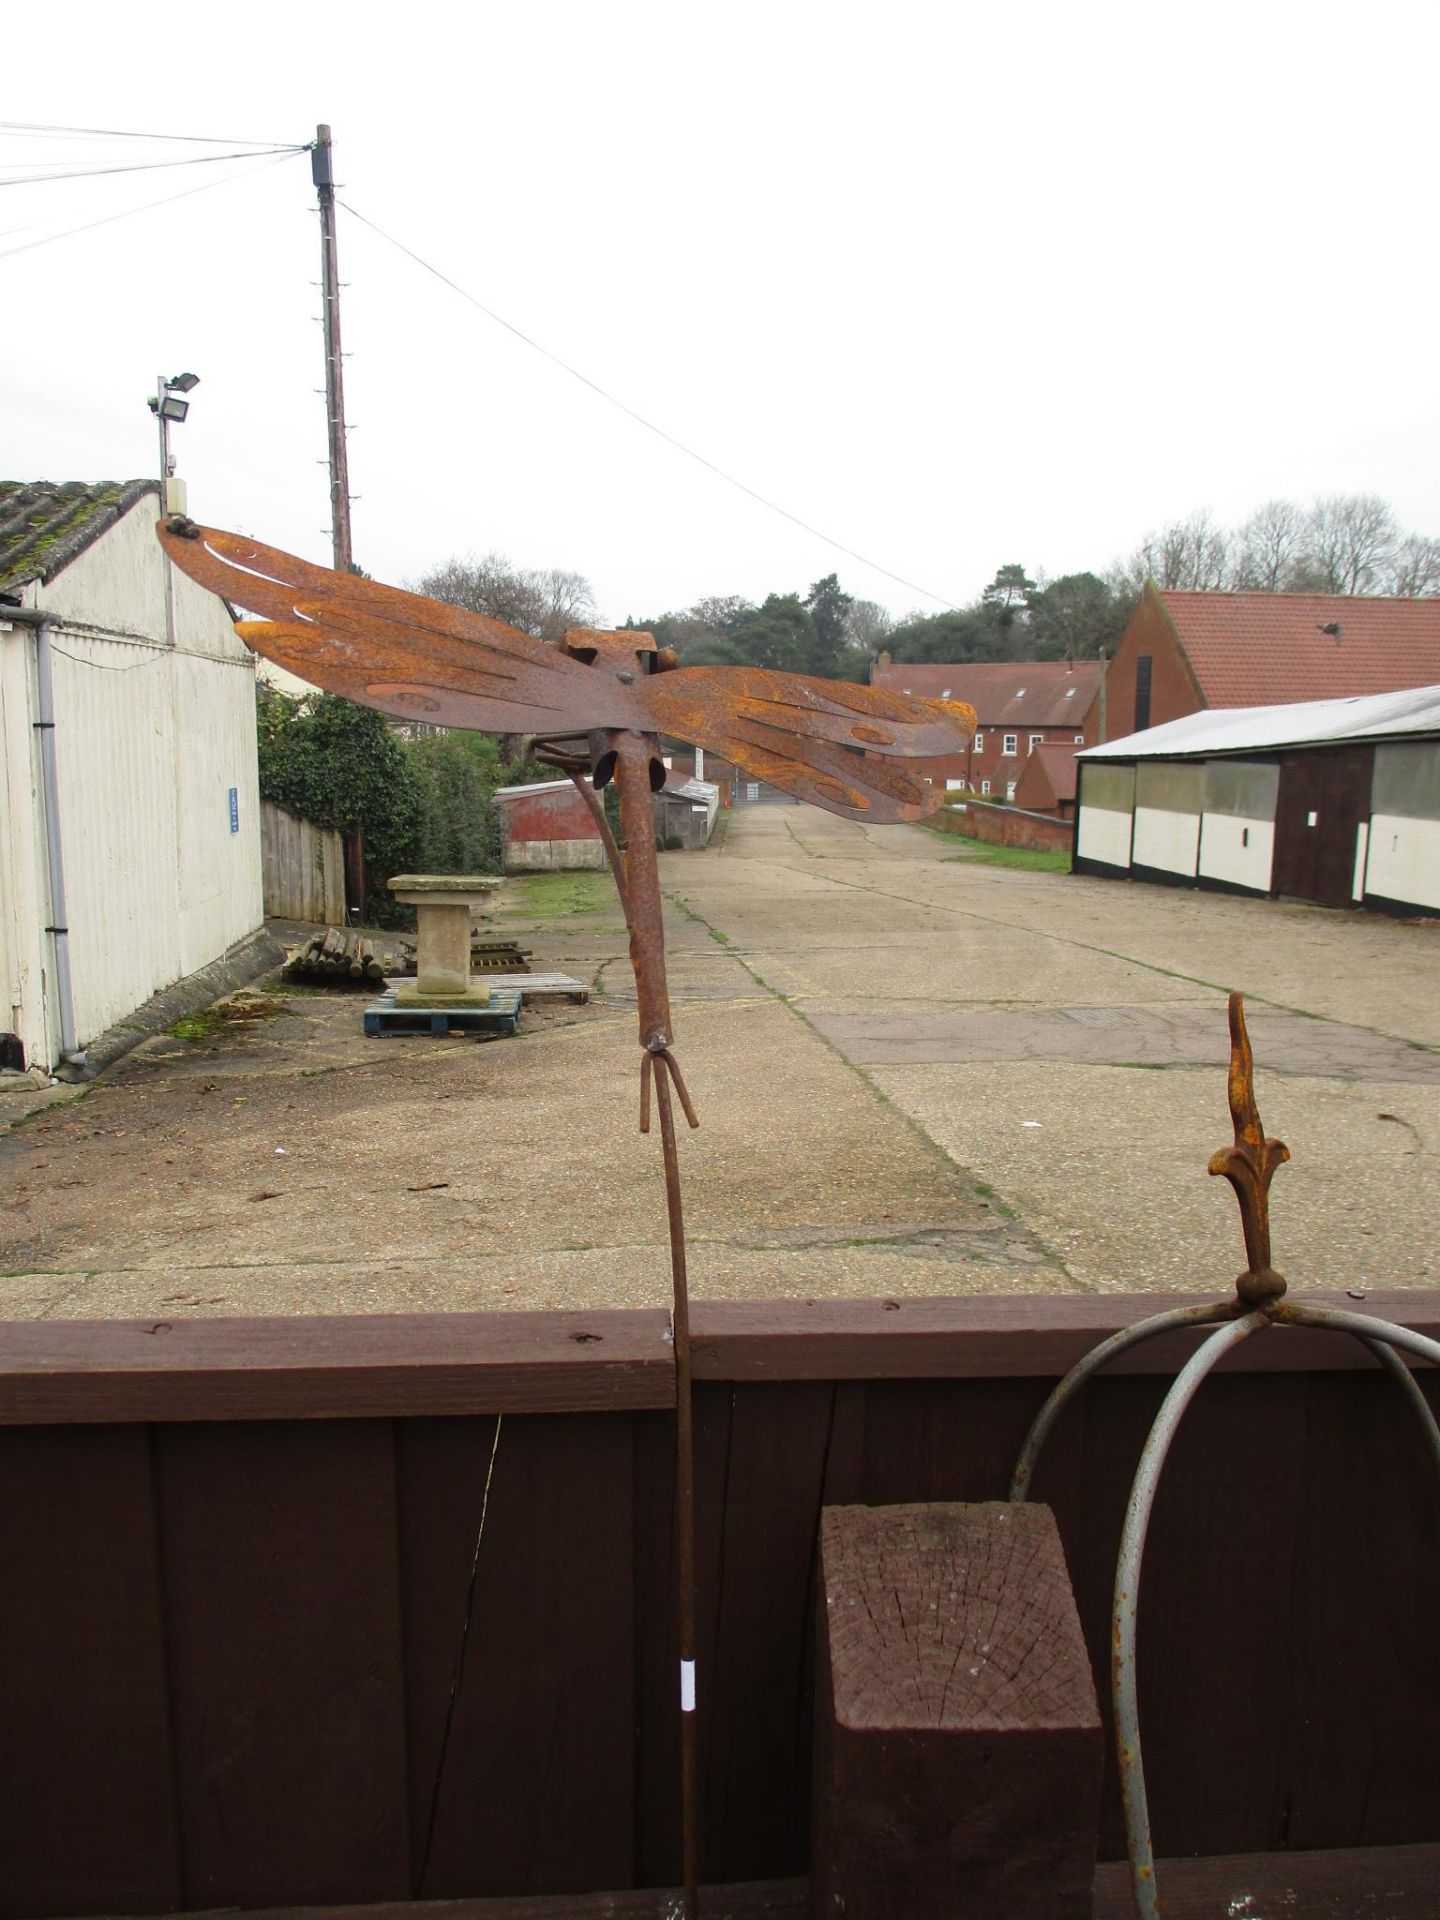 METAL GARDEN ORNAMENT OF A DRAGONFLY ON A STAND, HEIGHT APPROX 164CM